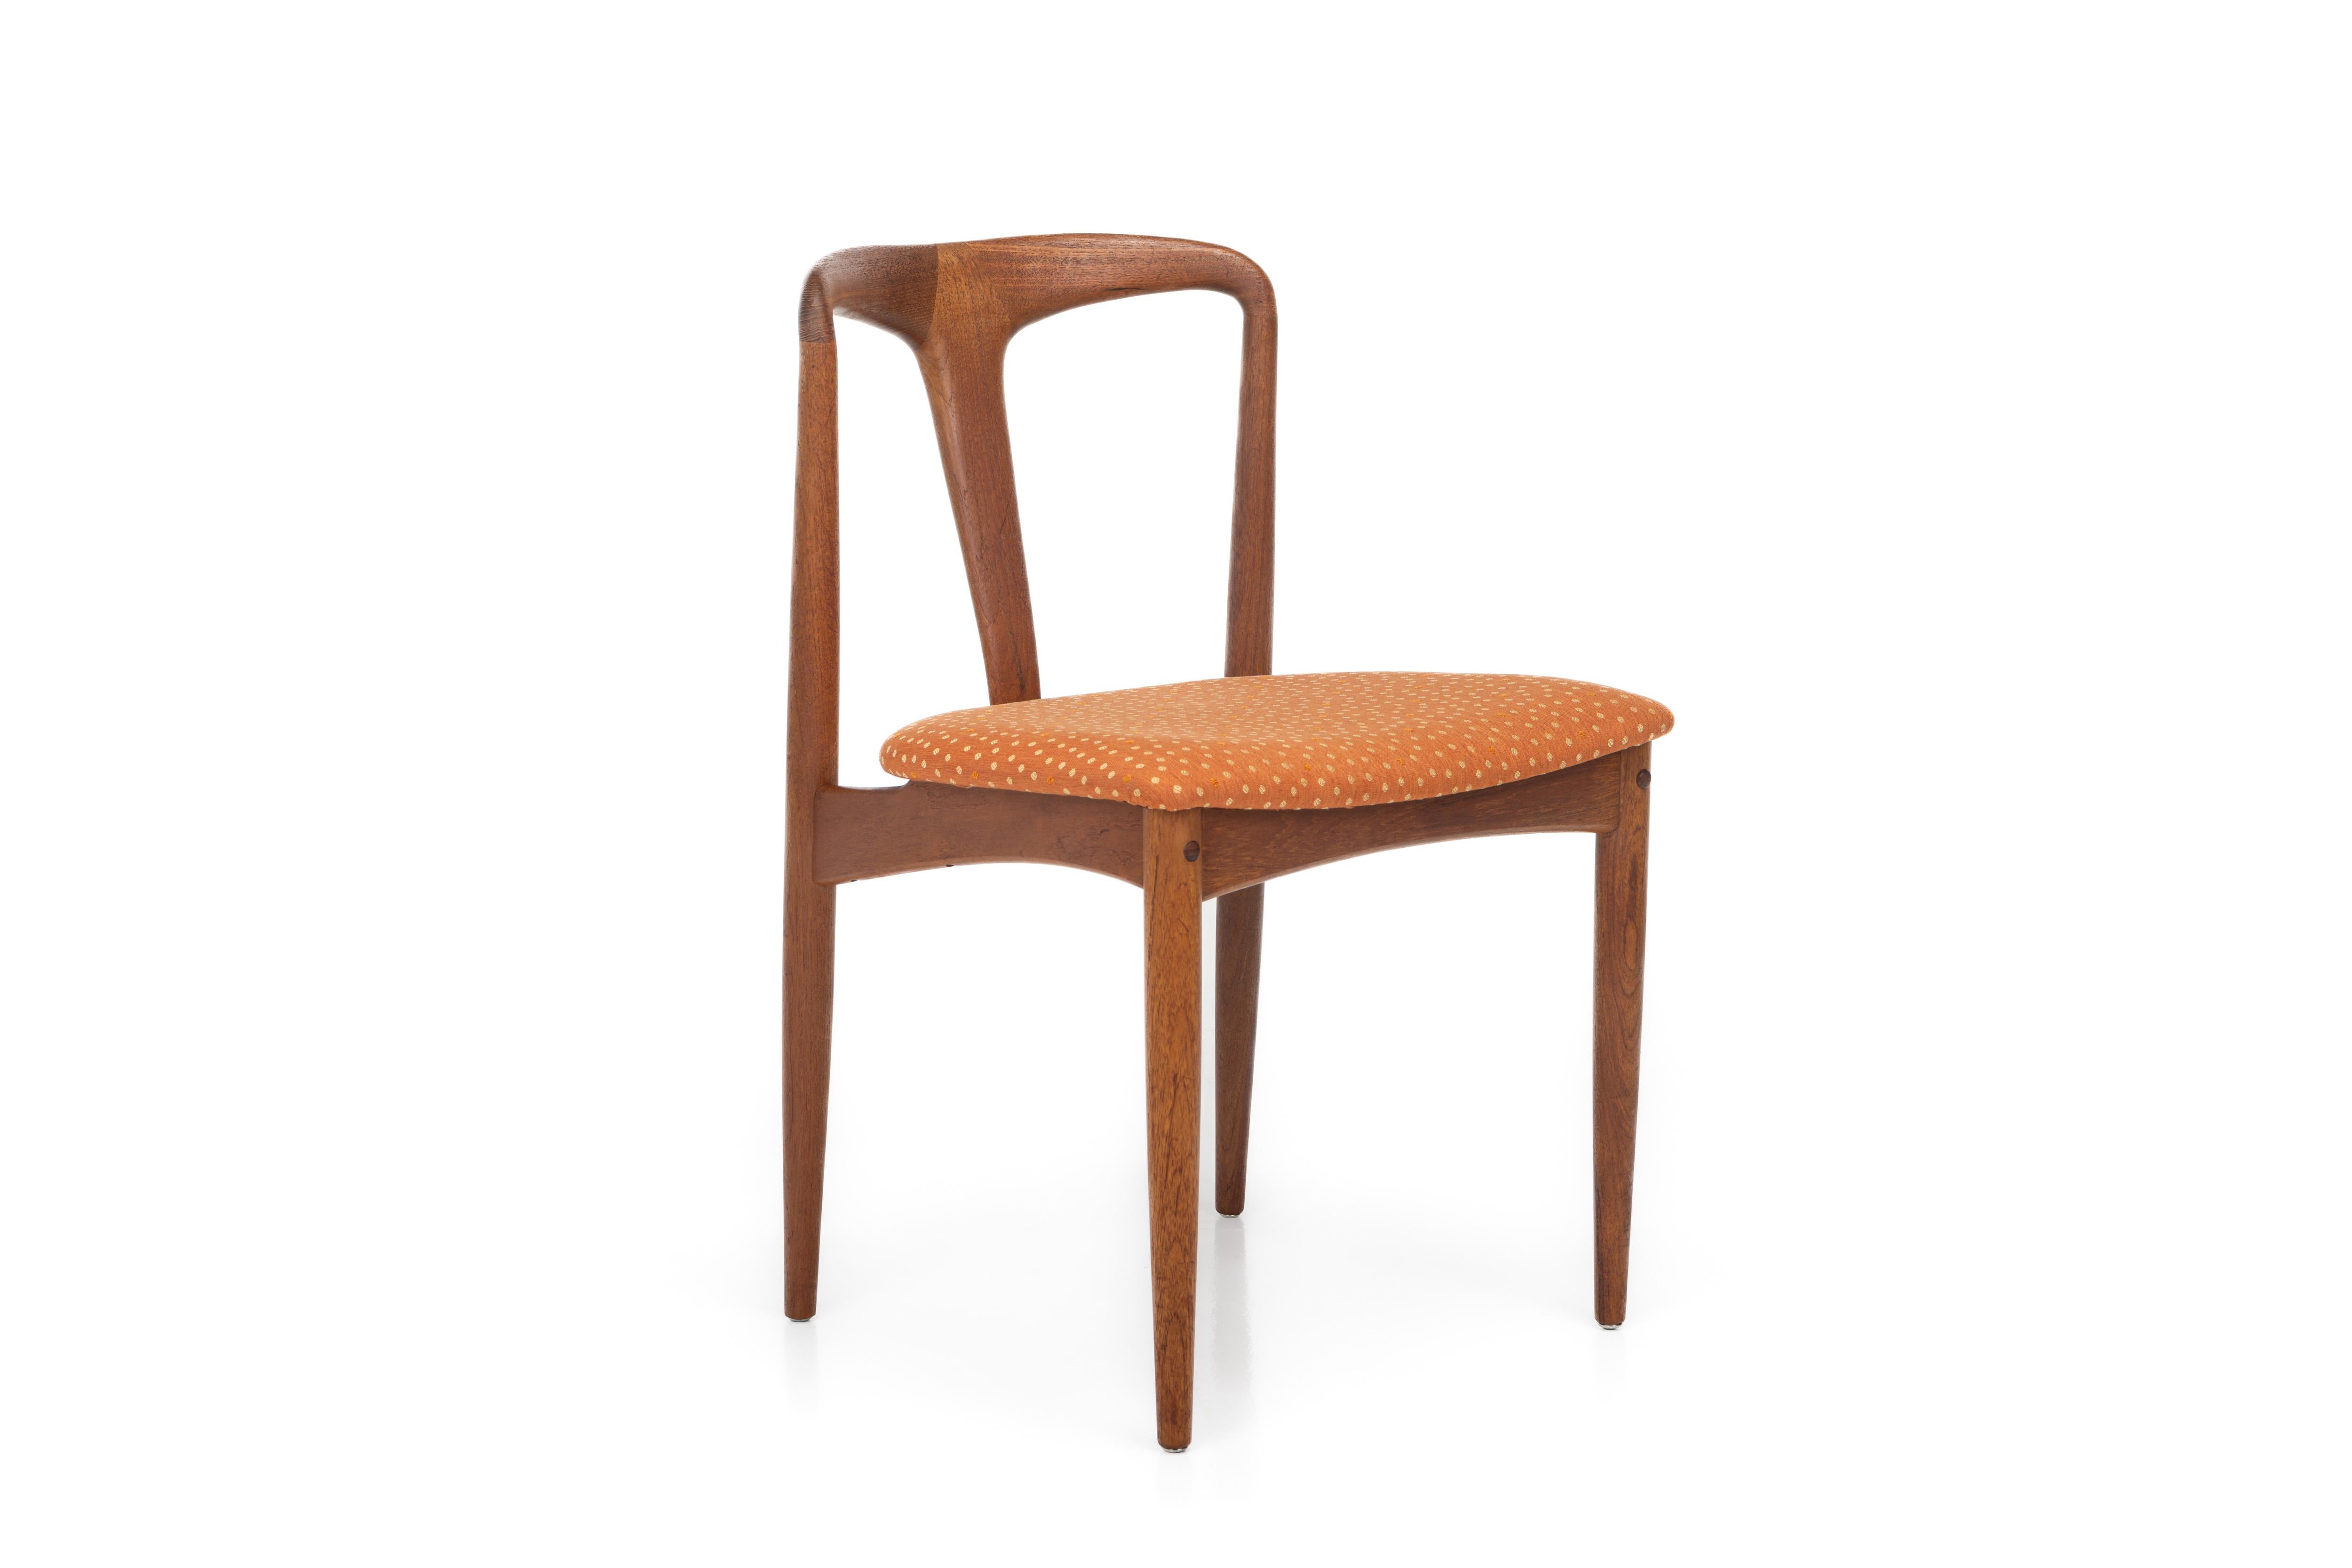 Set of 6 dining chairs by Johannes Andersen for Uldum Møbelfabrik in Denmark 196 For Sale 2